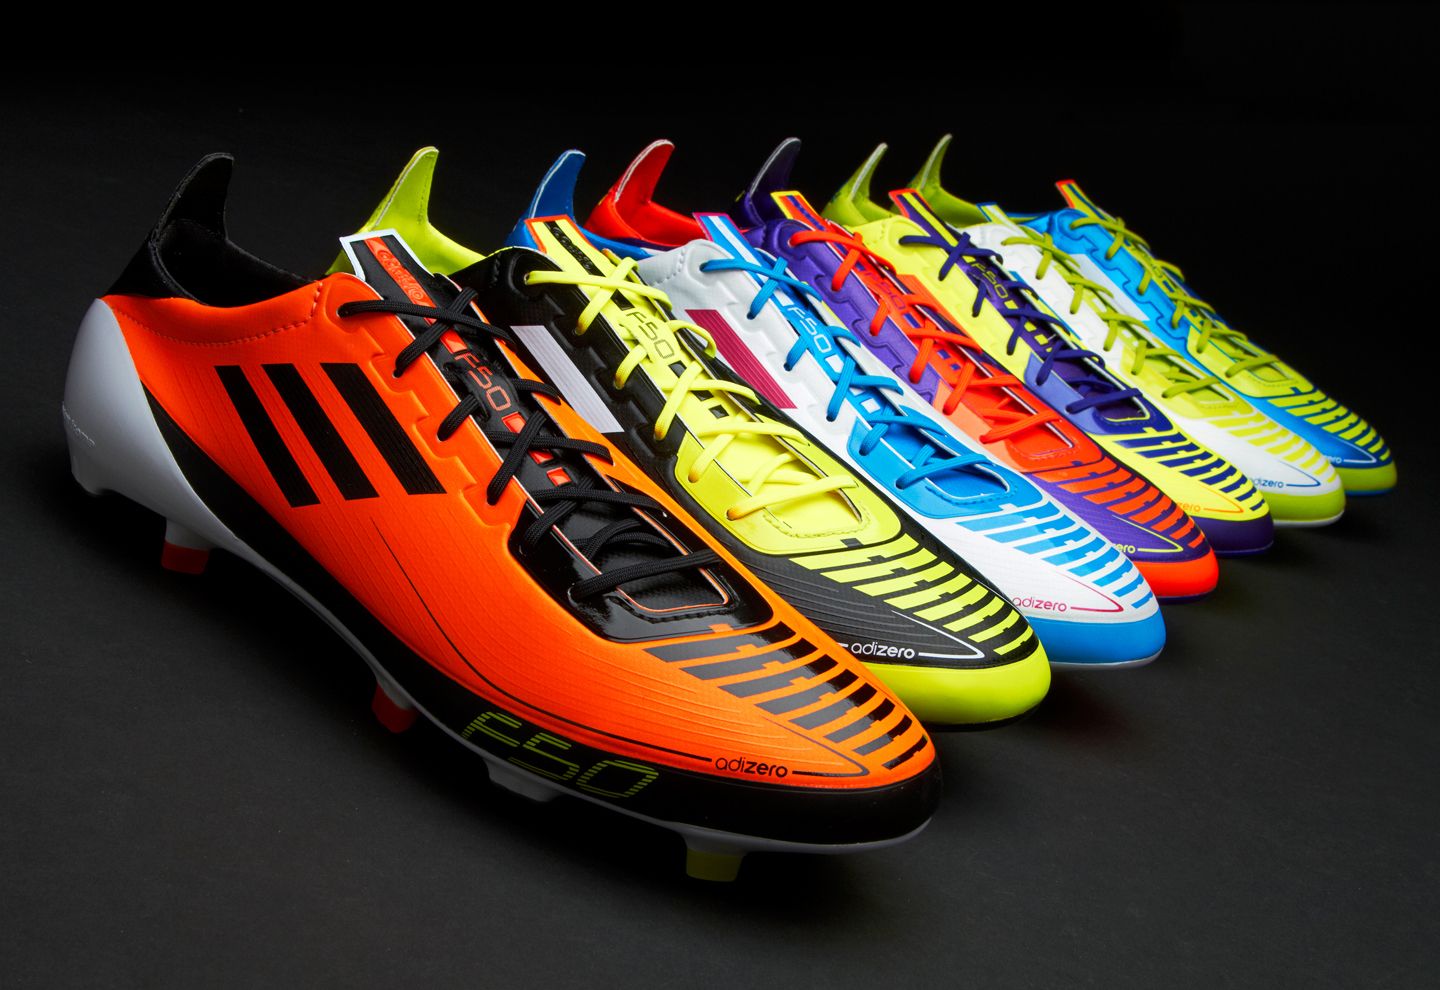 Cleats Background. Soccer Cleats Wallpaper, Cleats Wallpaper and Messi Cleats Wallpaper